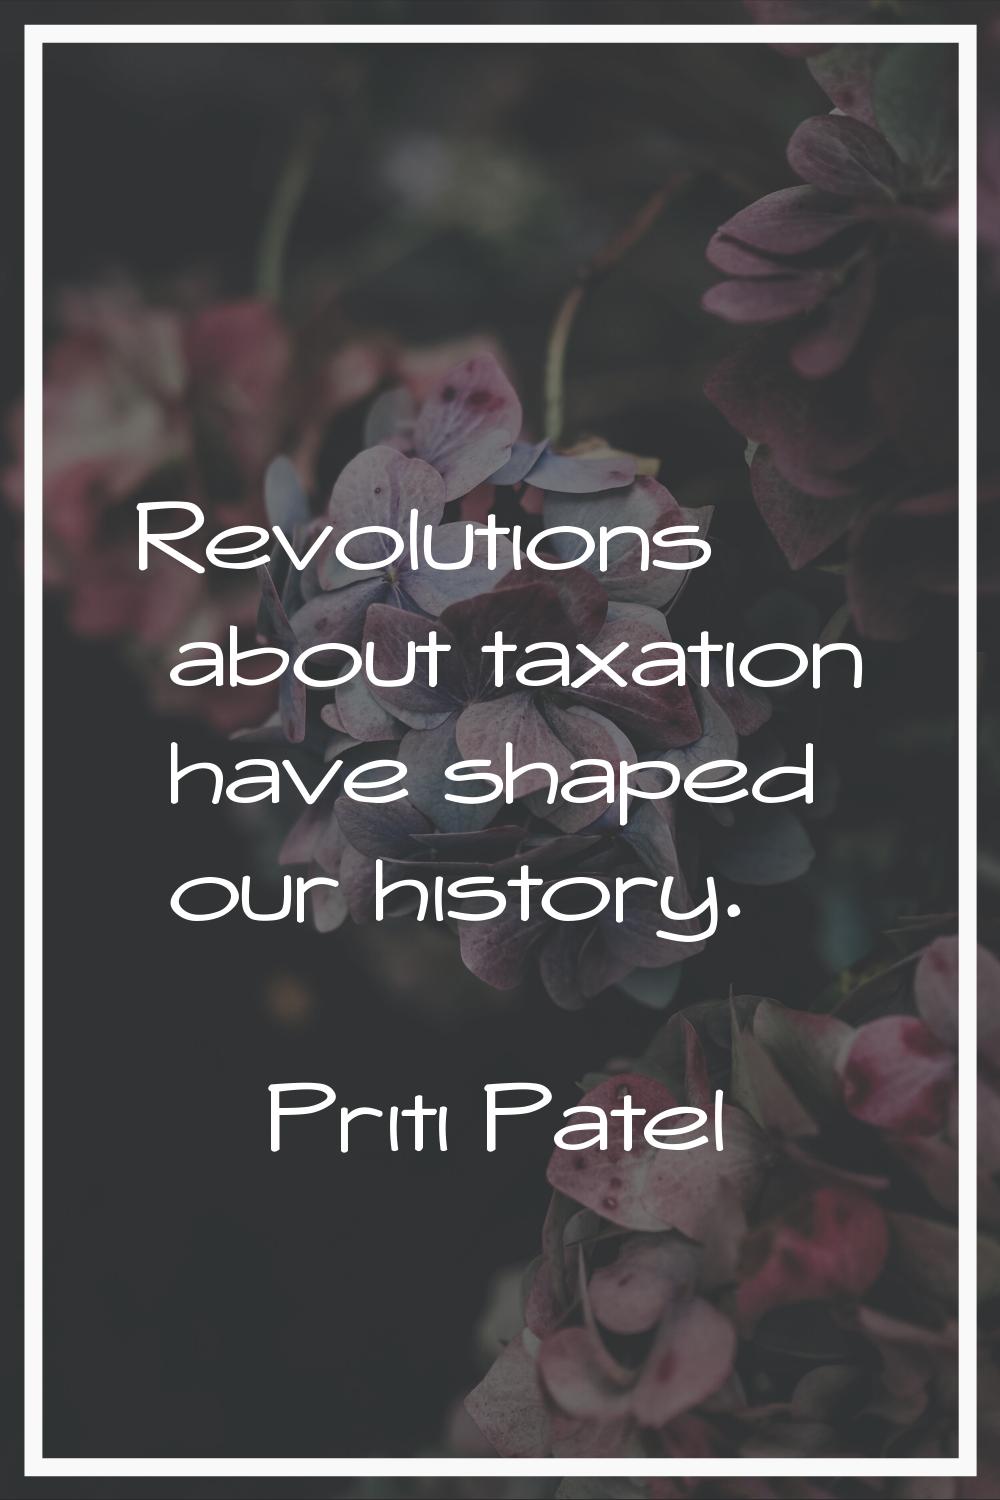 Revolutions about taxation have shaped our history.